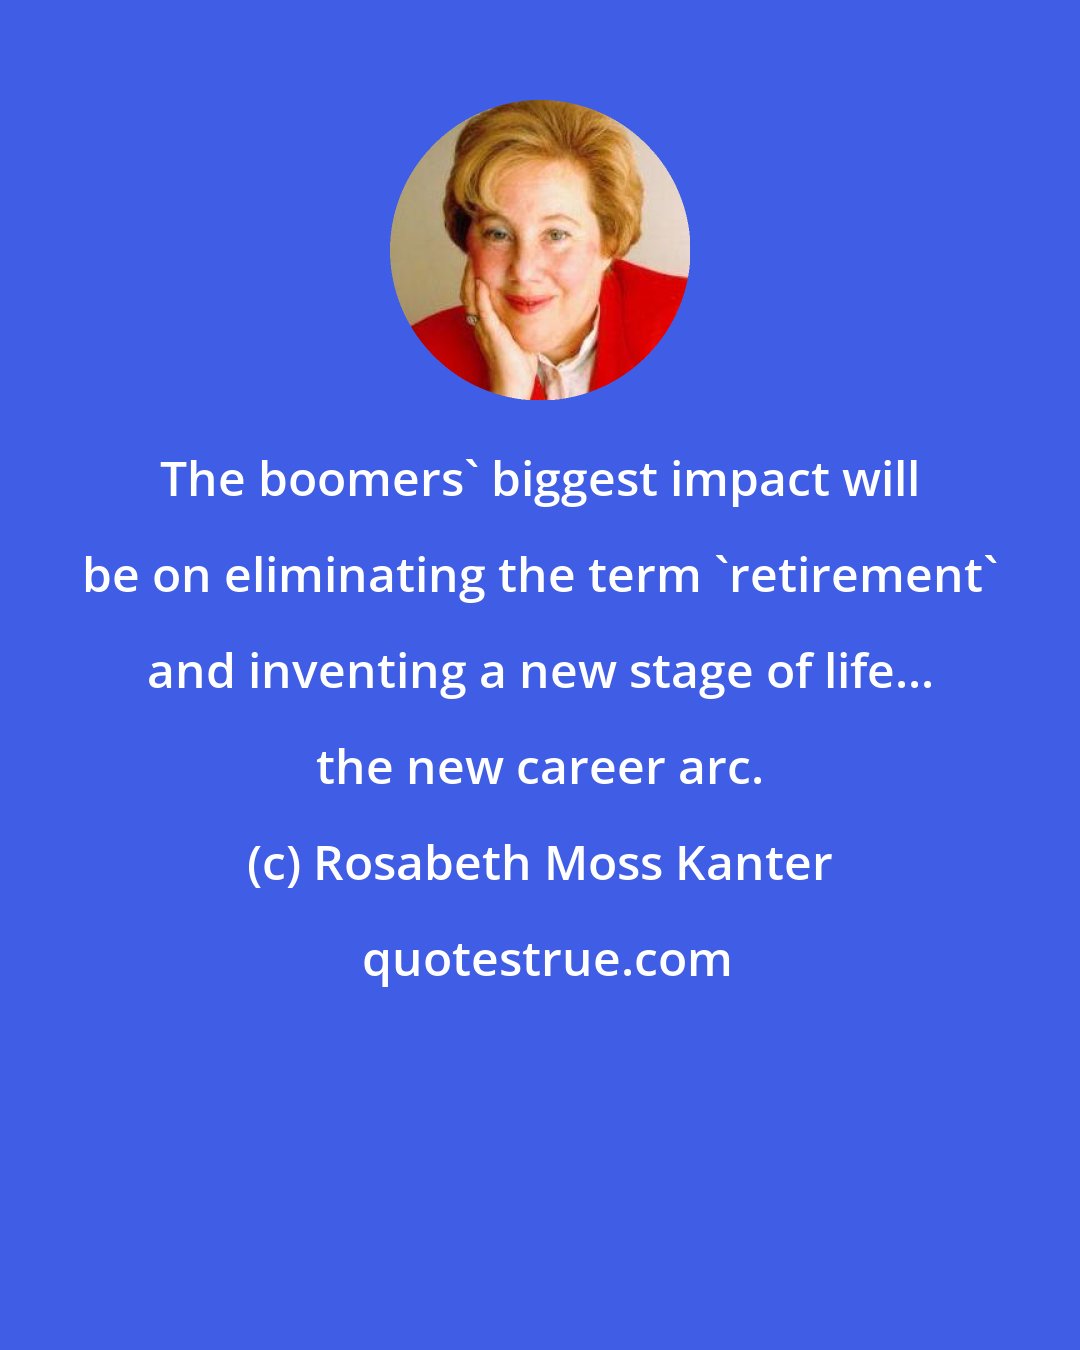 Rosabeth Moss Kanter: The boomers' biggest impact will be on eliminating the term 'retirement' and inventing a new stage of life... the new career arc.